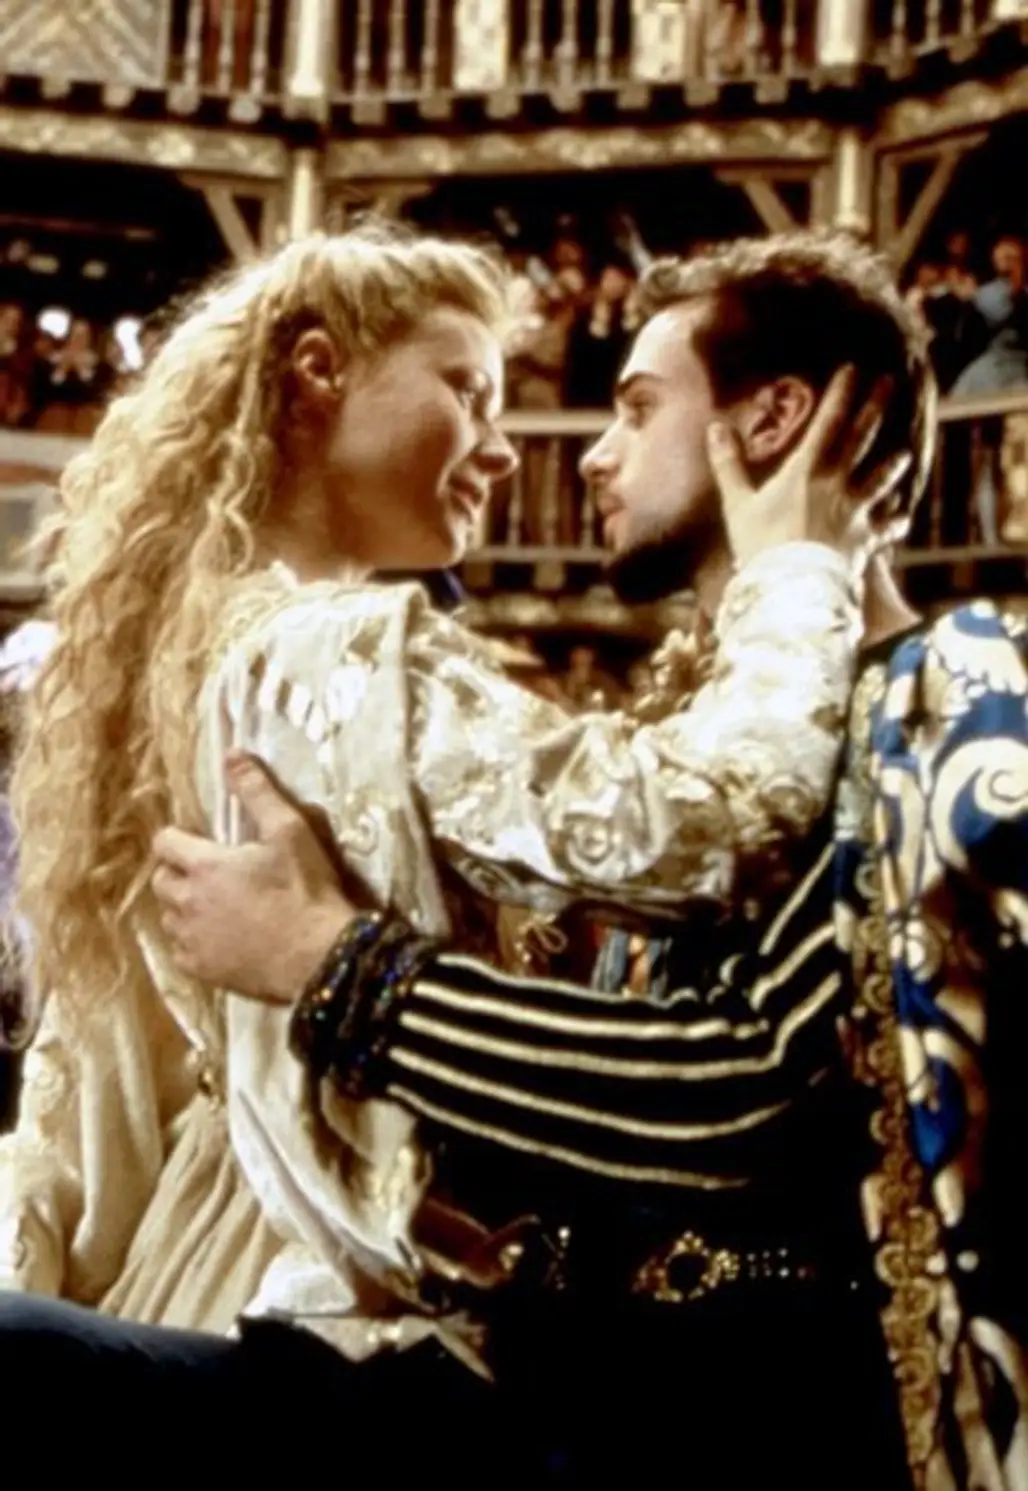 Will and Viola, "Shakespeare in Love"